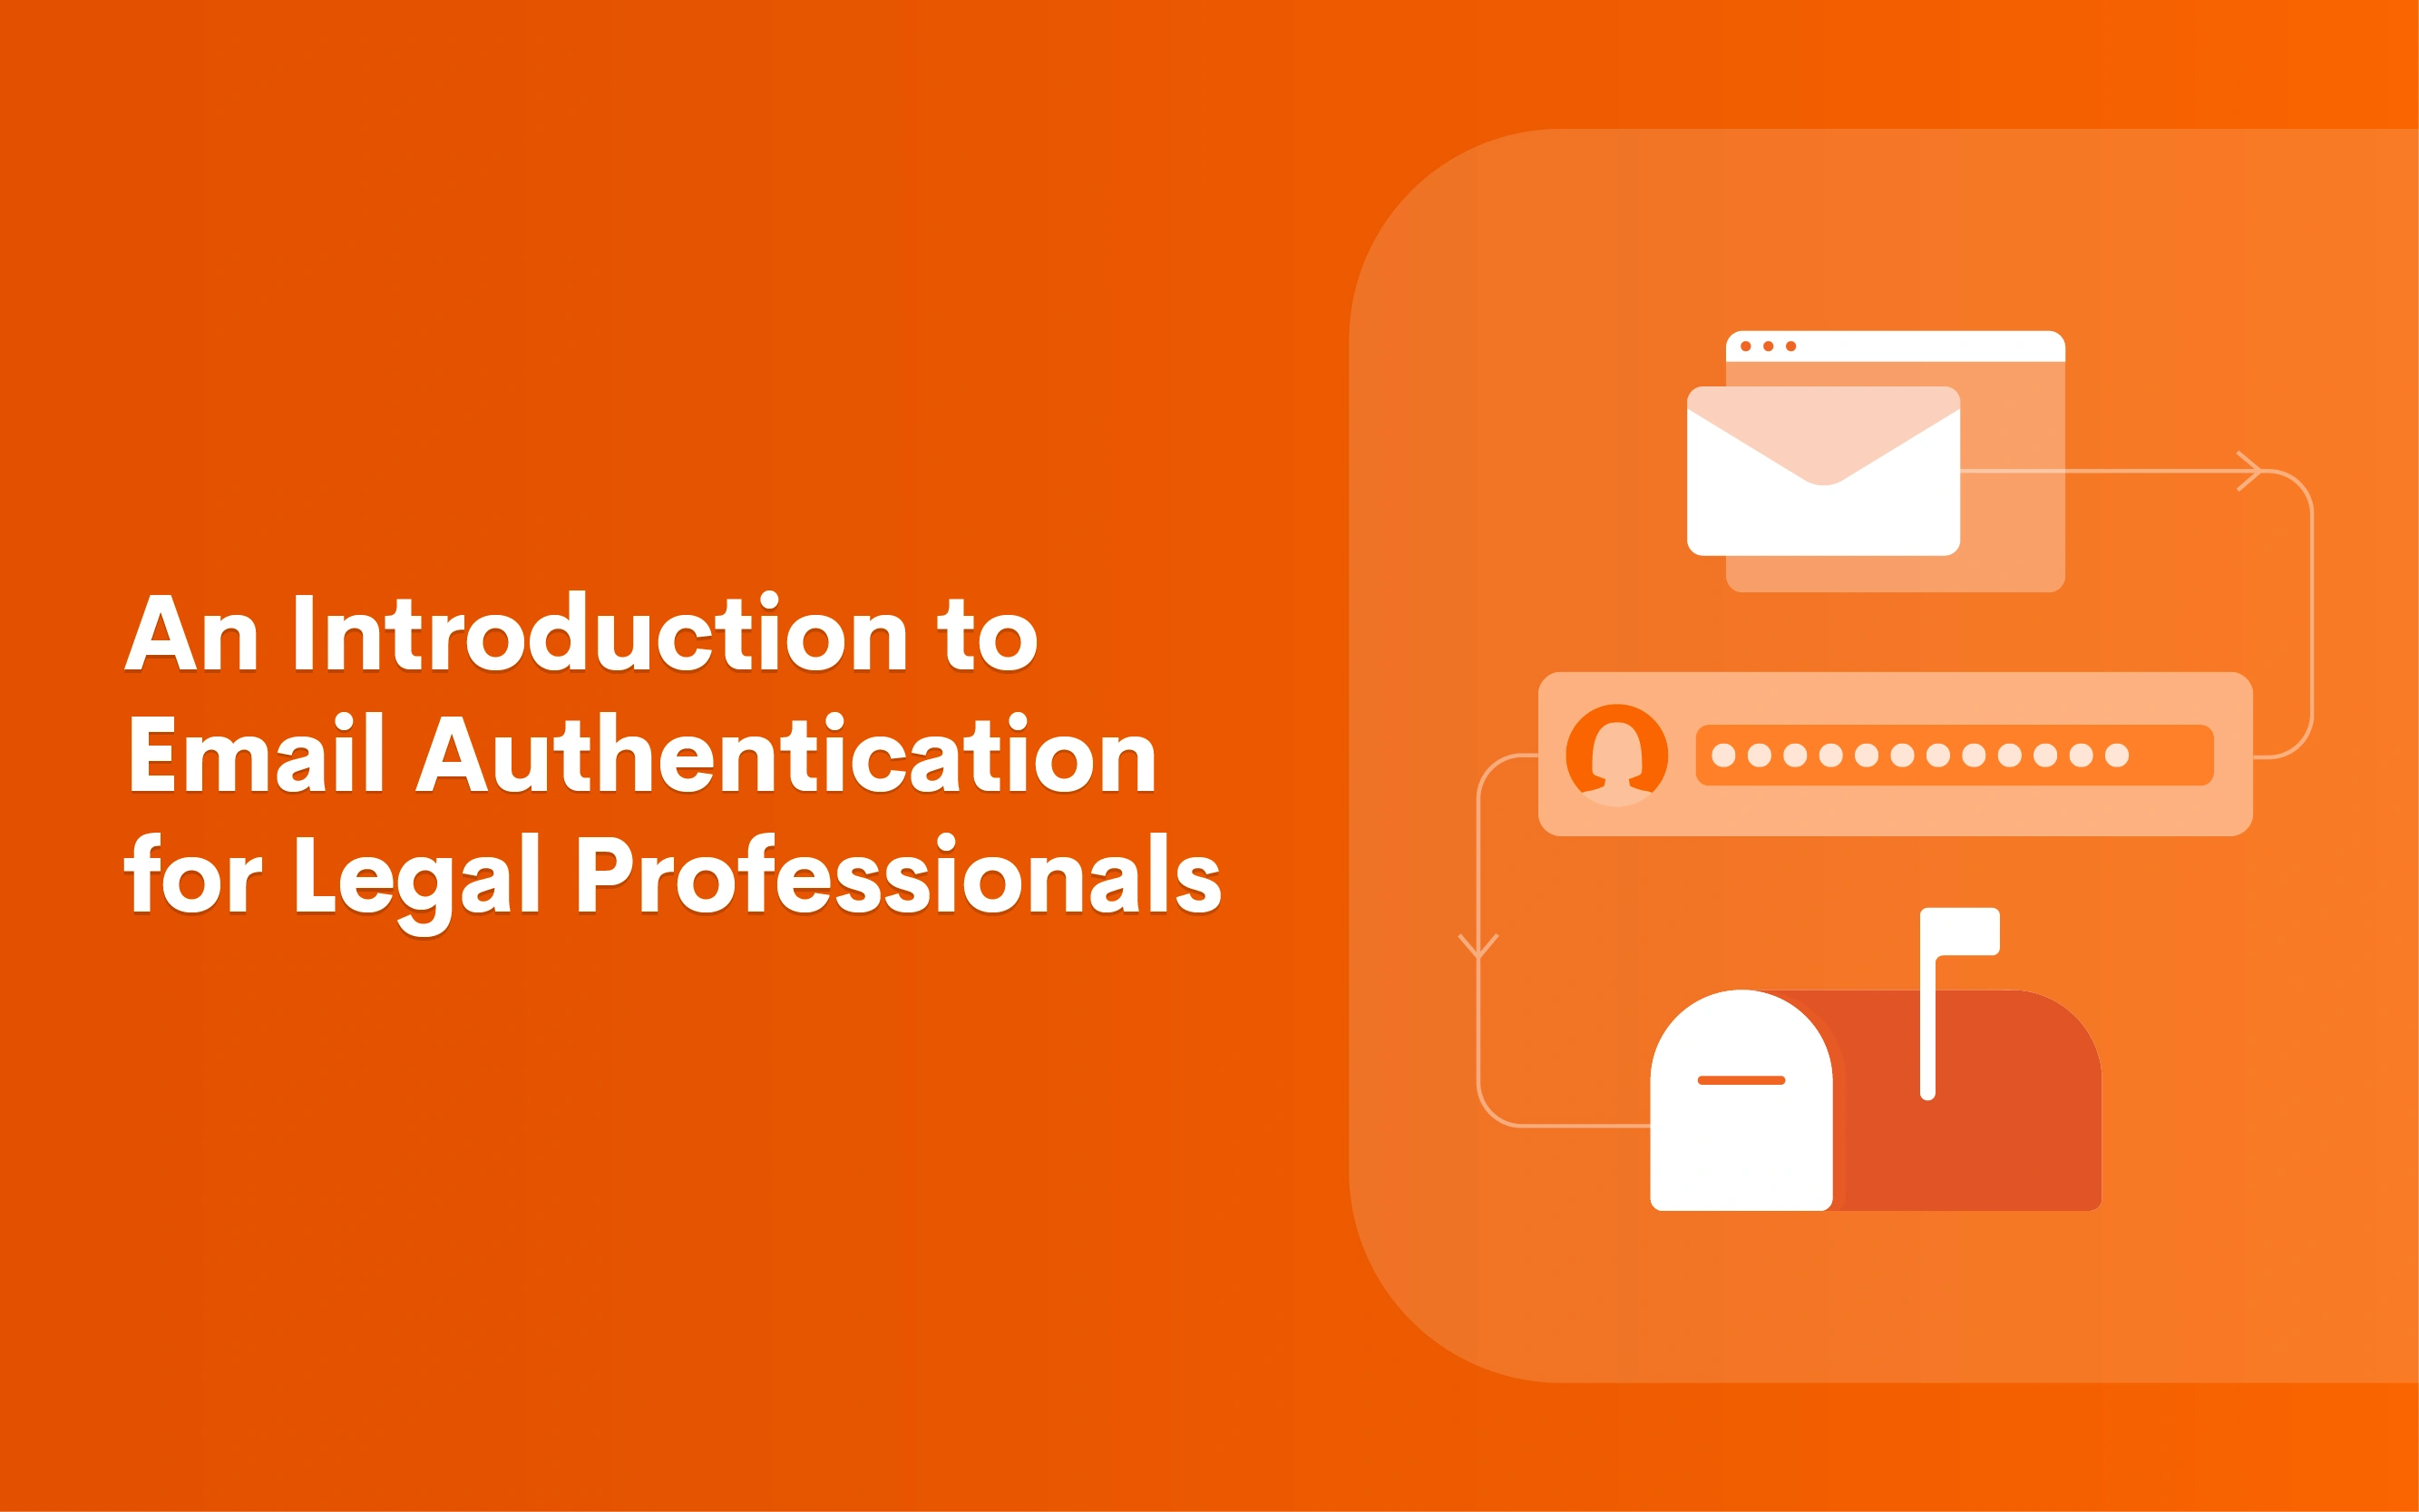 Google & Yahoo to Roll Out New Email Authentication & Spam